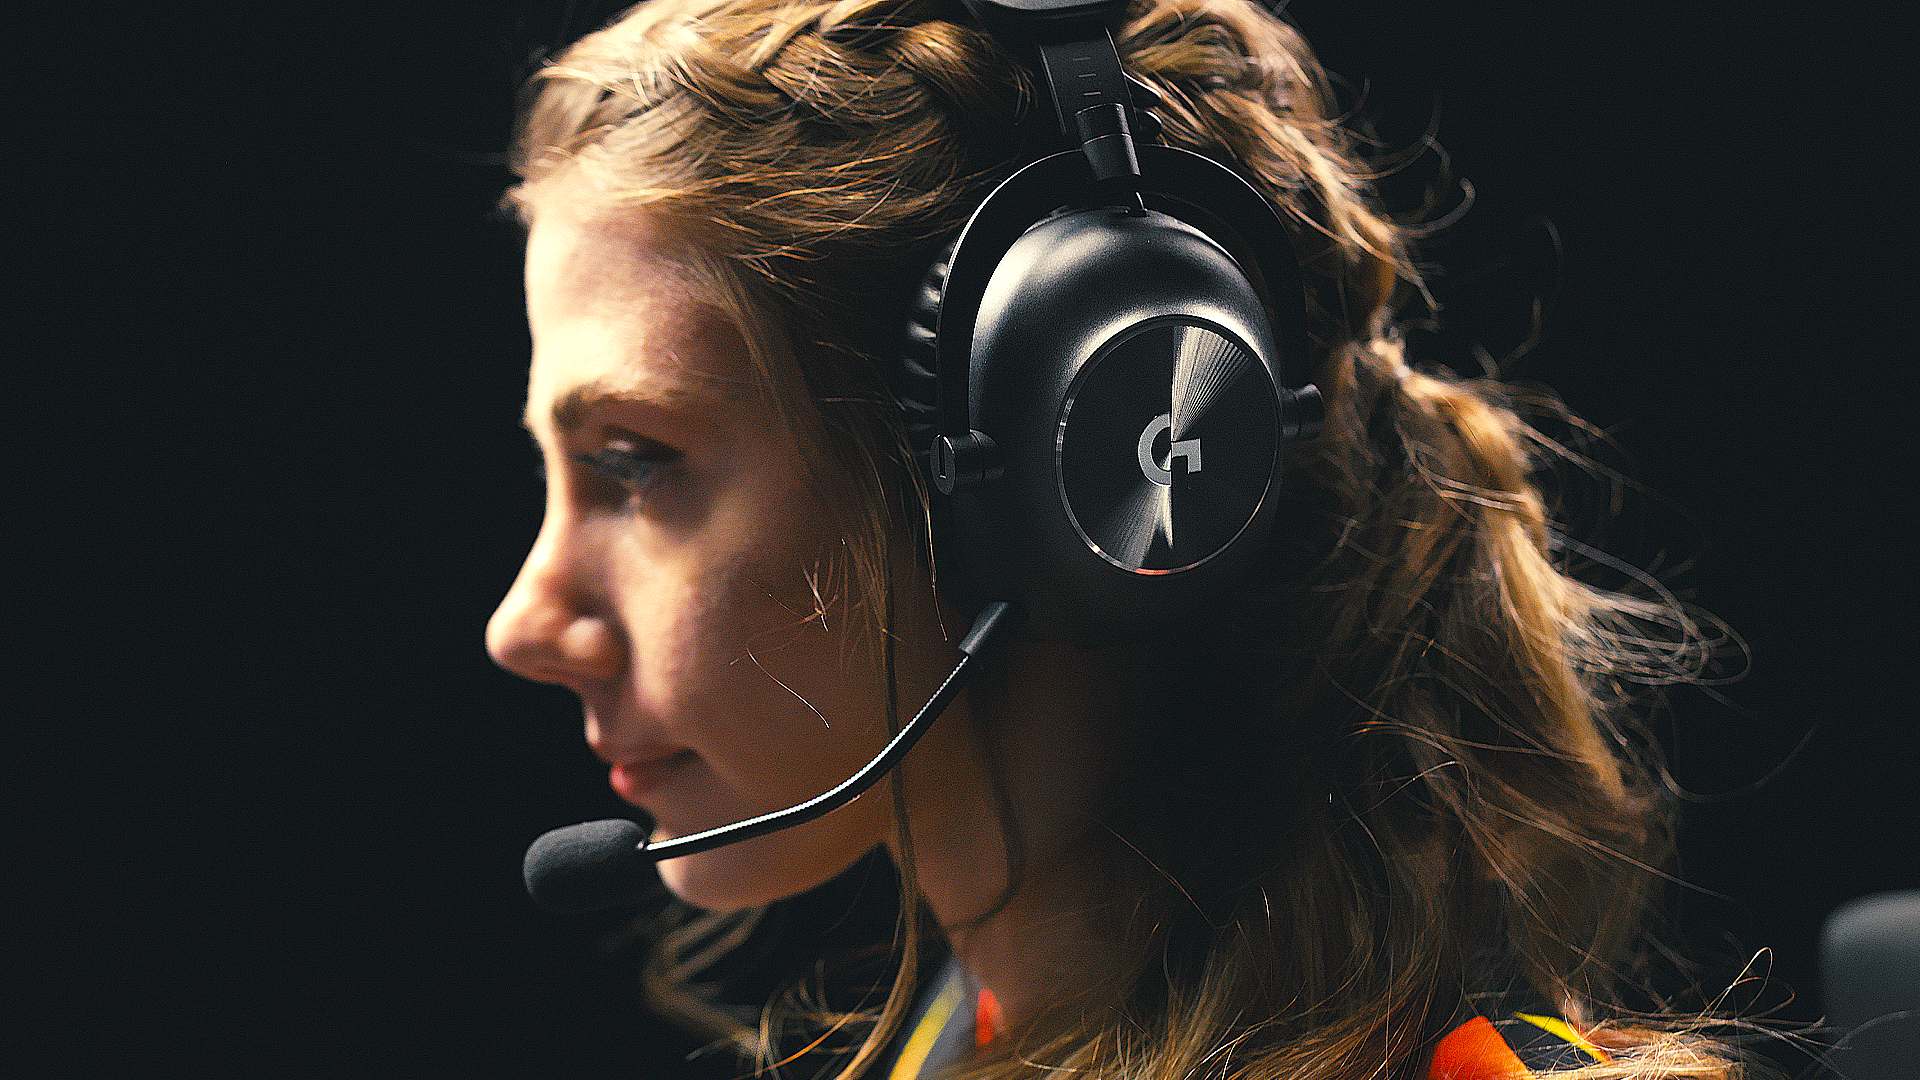 Logitech unveils new pro esports headset ahead of Counter-Strike 2